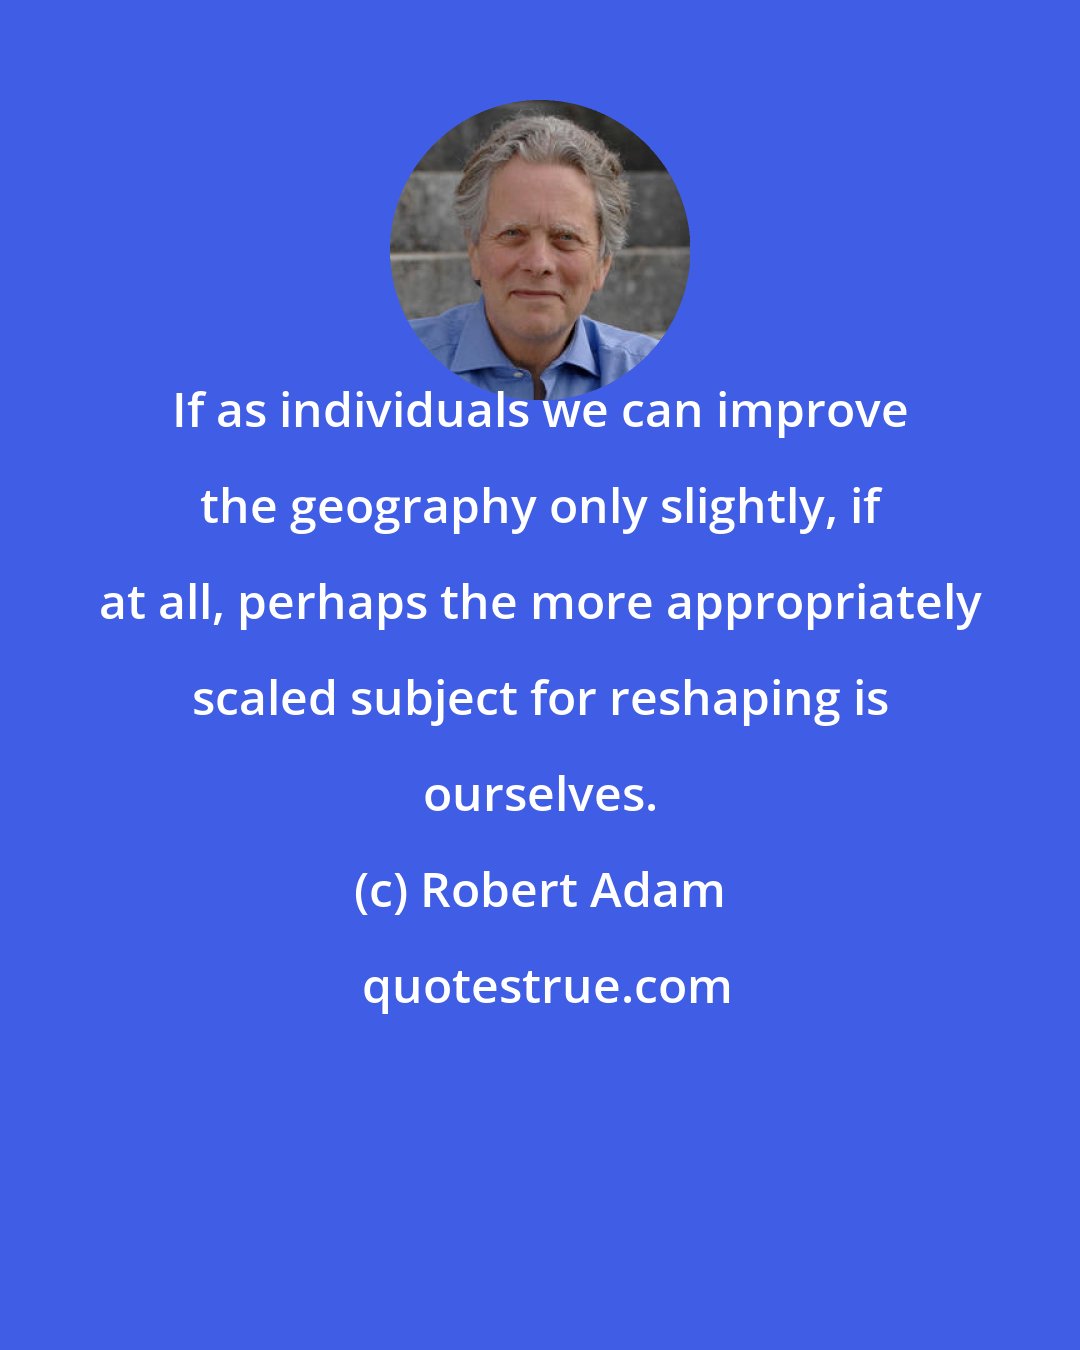 Robert Adam: If as individuals we can improve the geography only slightly, if at all, perhaps the more appropriately scaled subject for reshaping is ourselves.